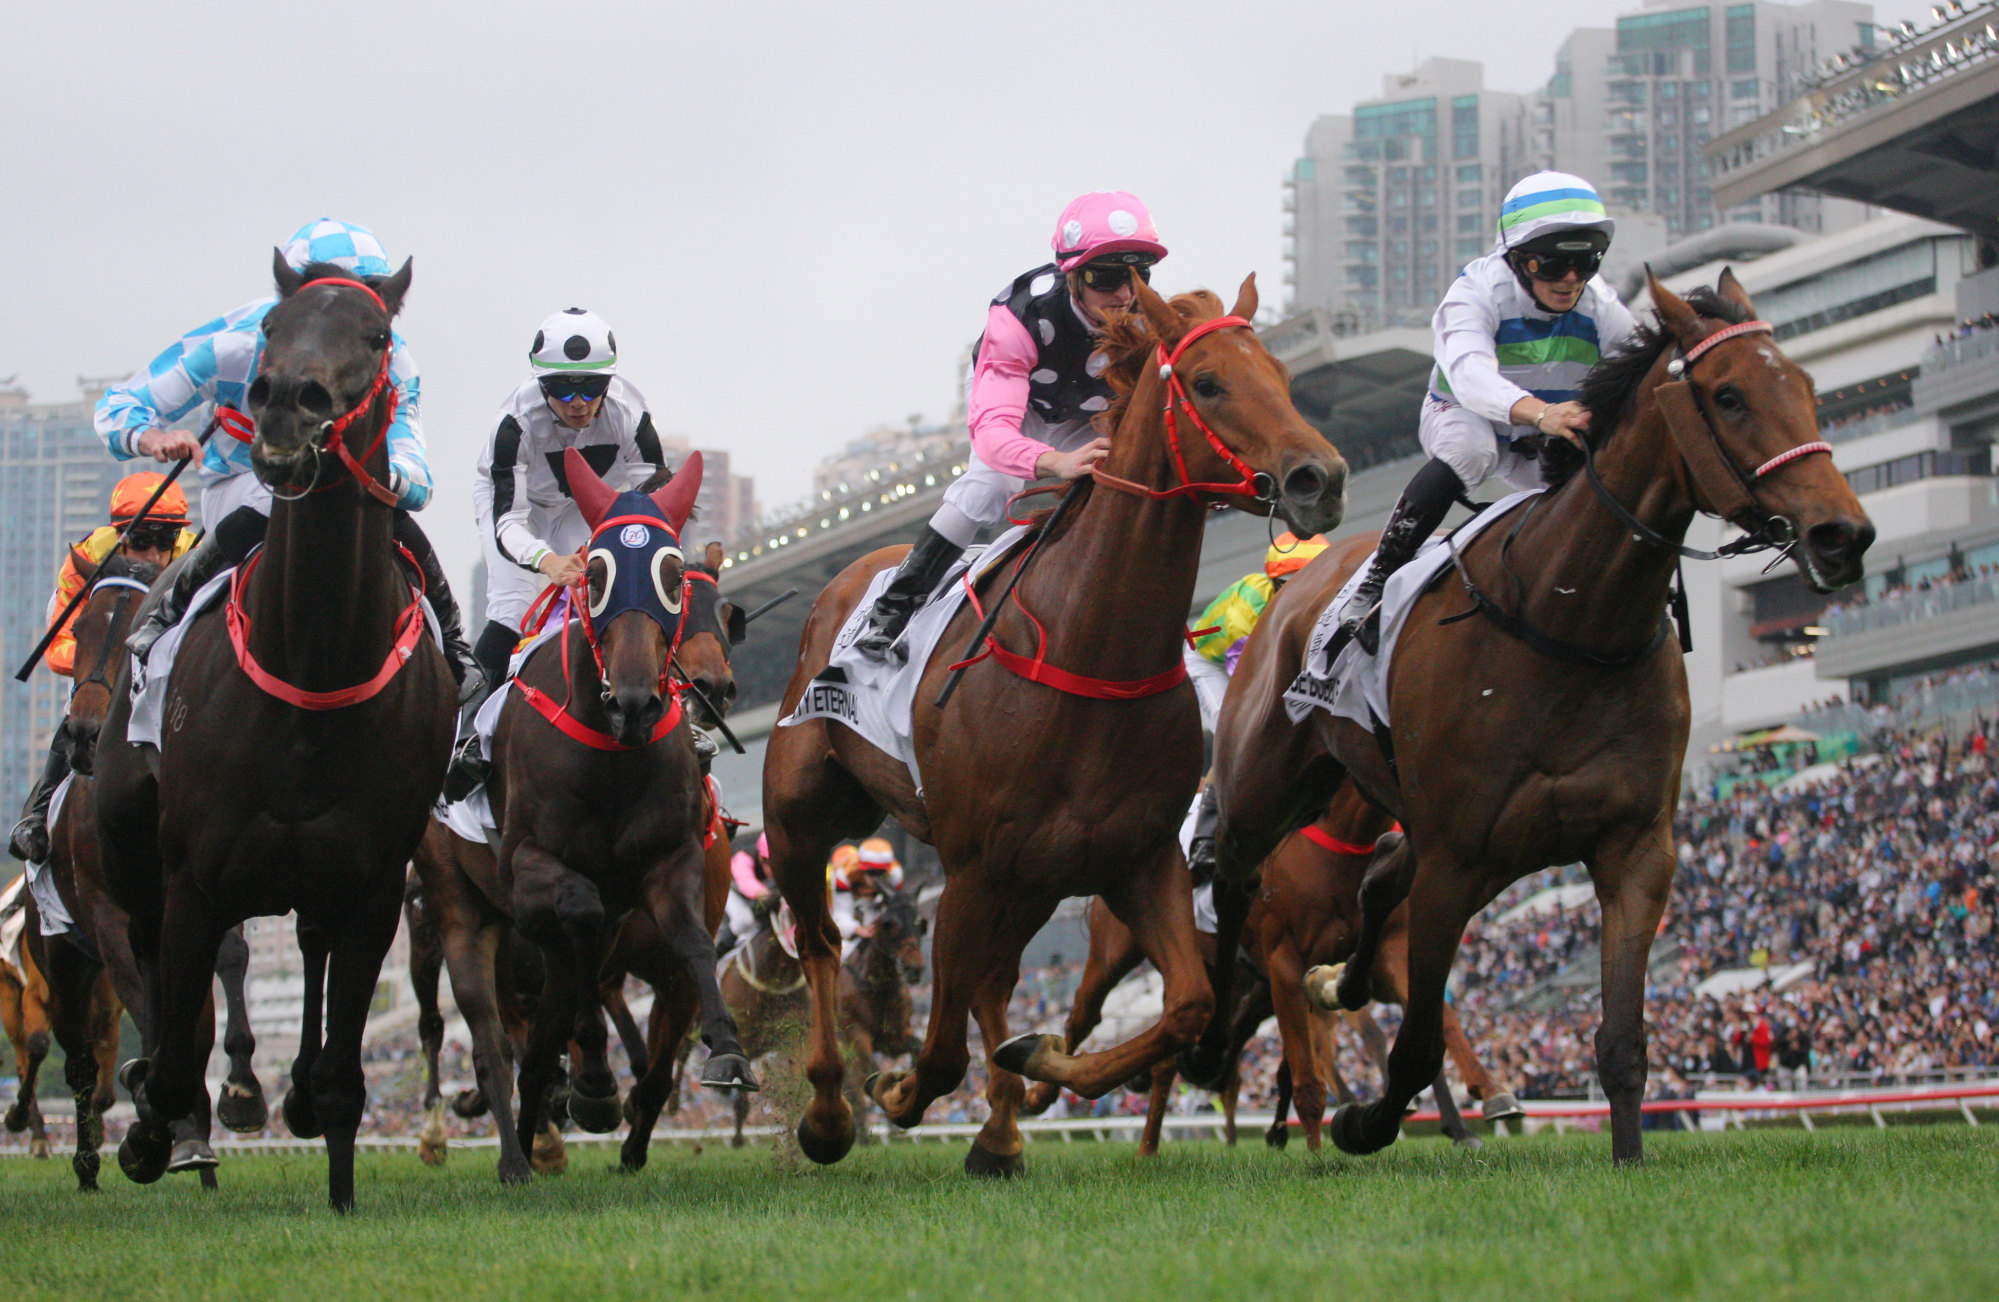 Voyage Bubble (right) defeats Tuchel (left) and Beauty Eternal (pink and black silks) to win the Sunday’s Hong Kong Derby.